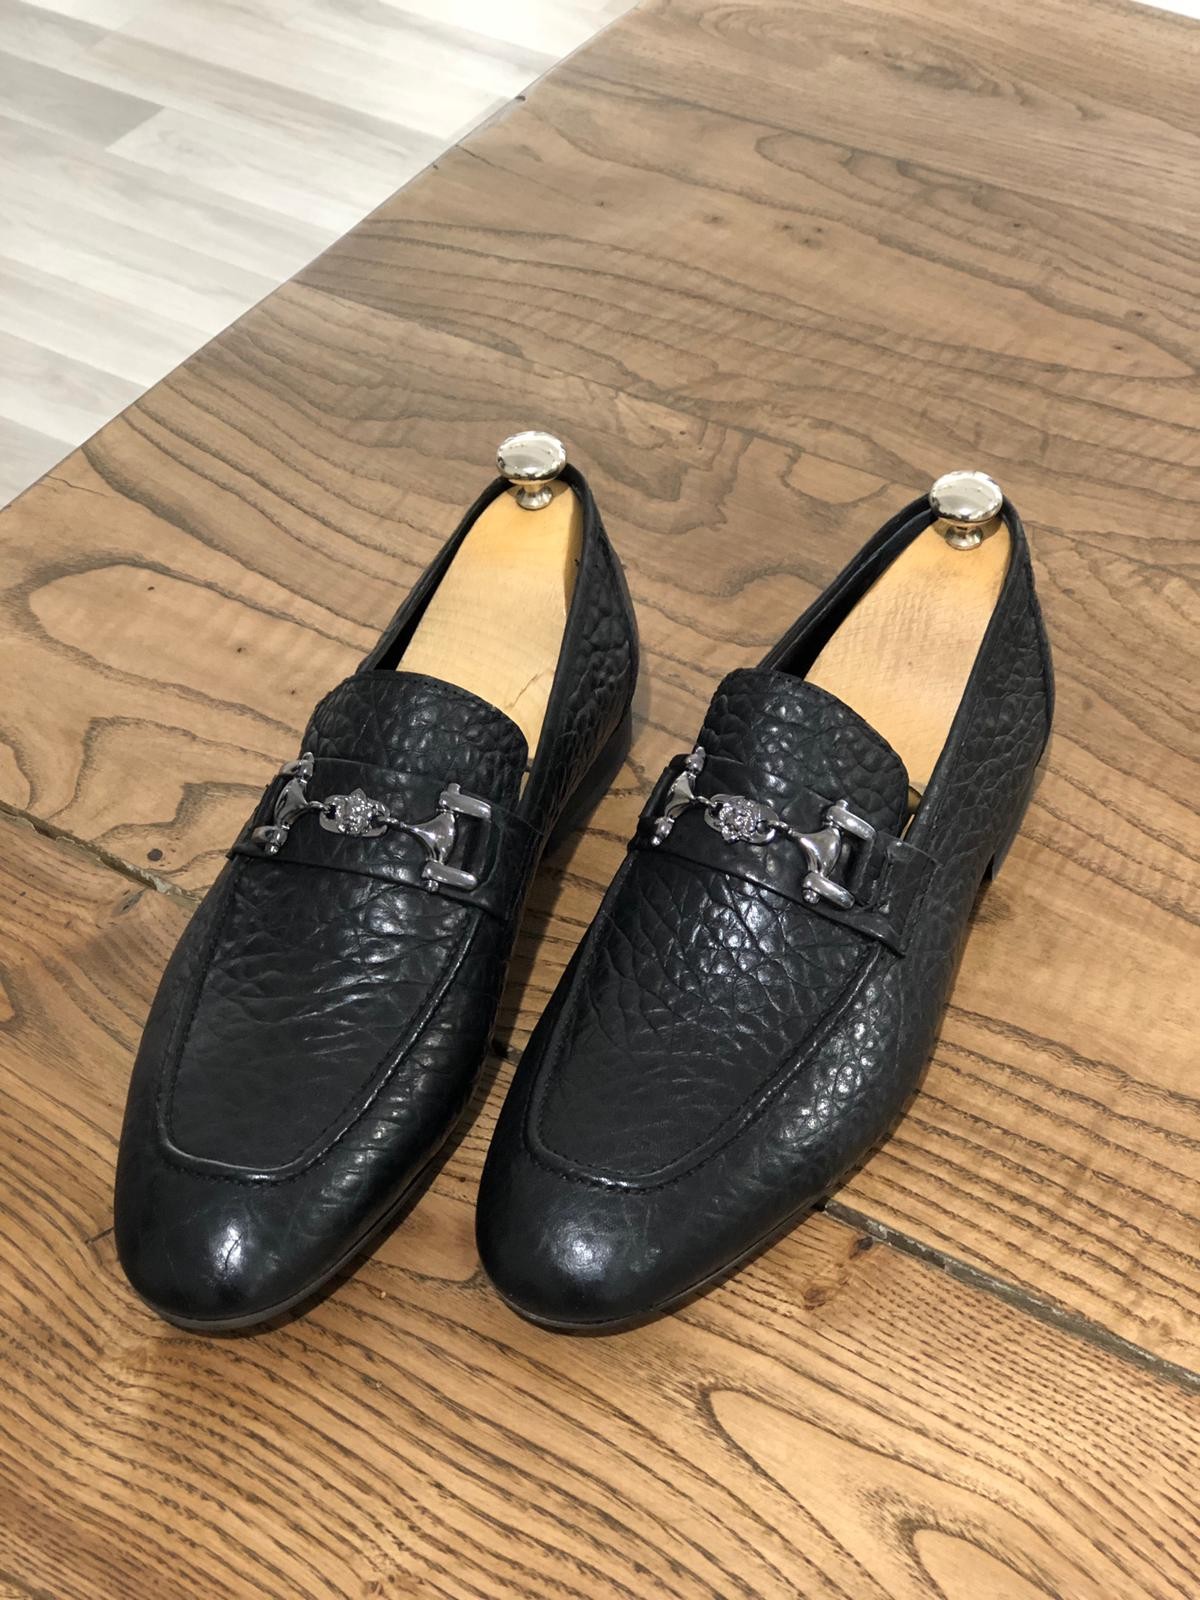 Buy Black Leather Loafer by Gentwith.com with Free Shipping